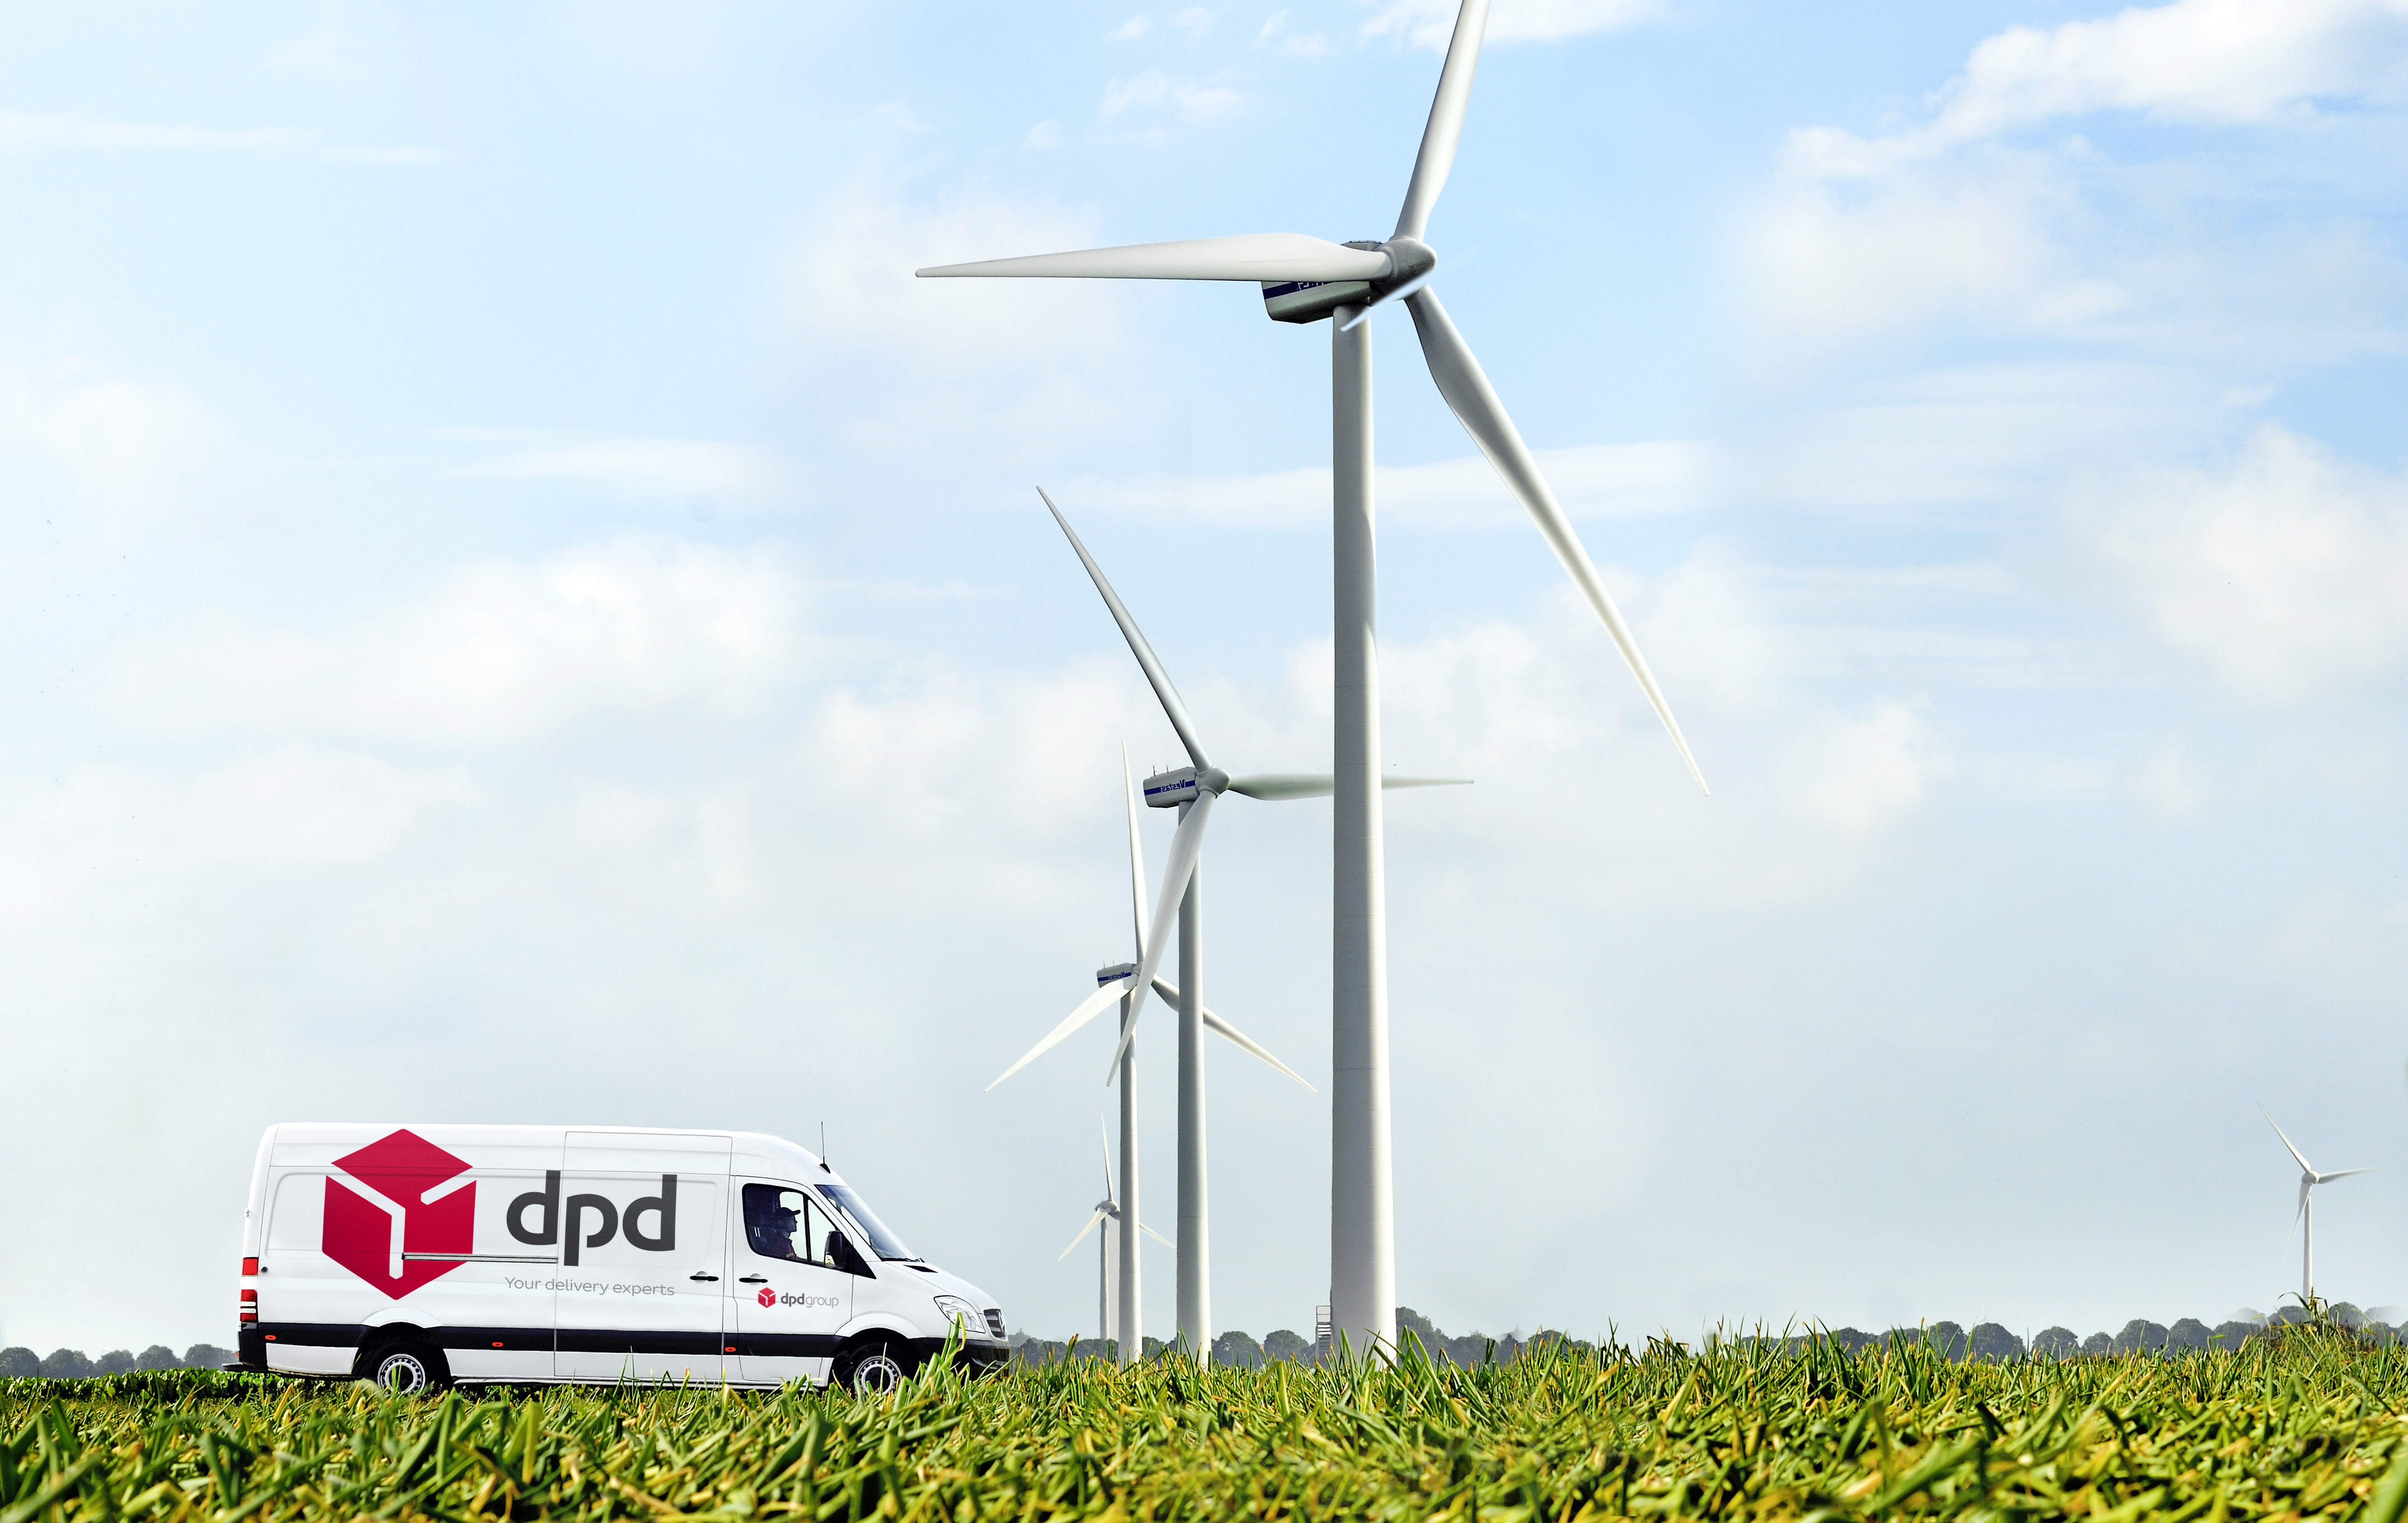 DrivingChange™ or applied sustainability with DPDgroup